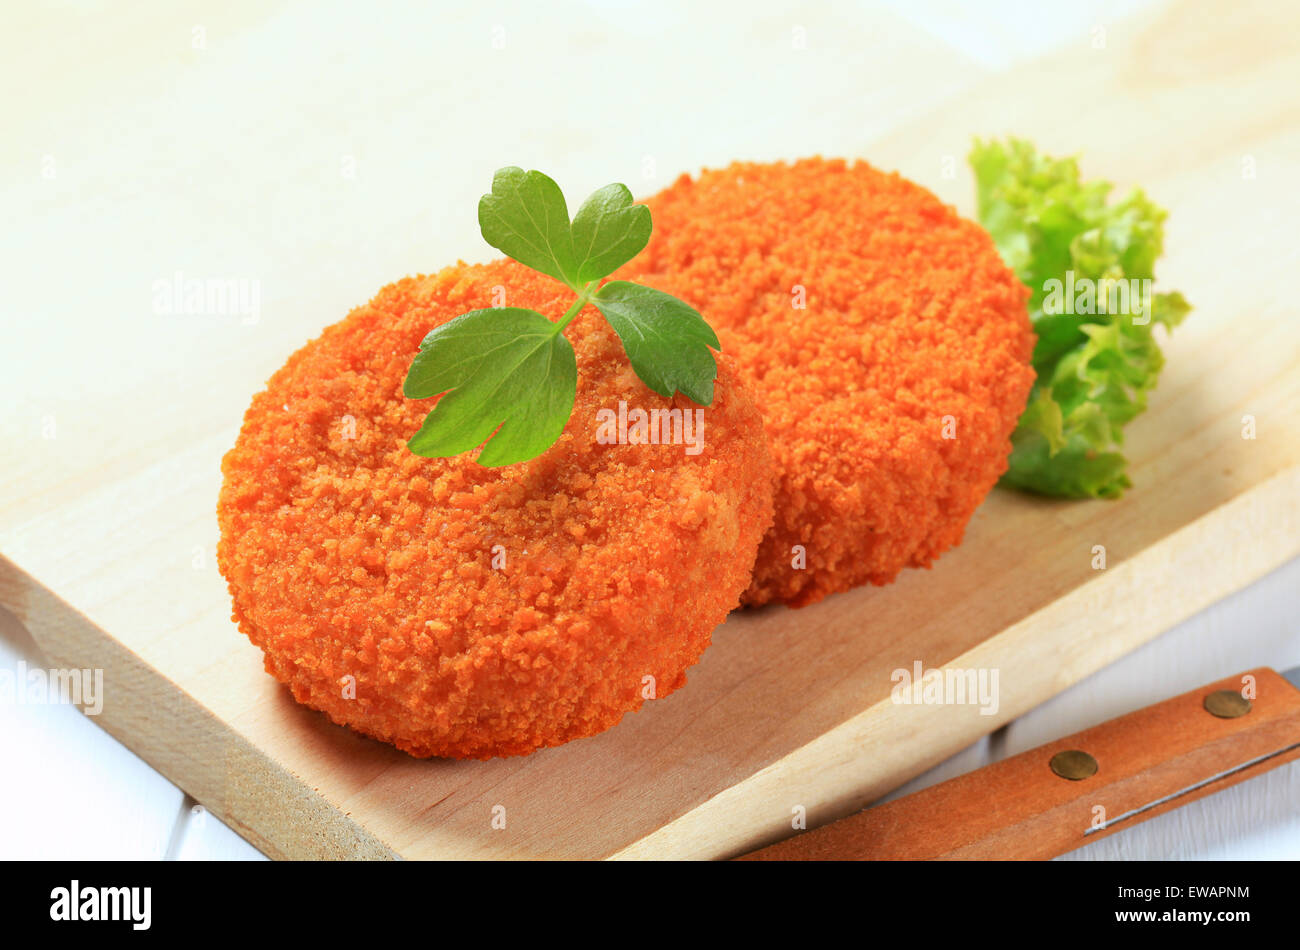 Fried cheese, minced meat or vegetable patties Stock Photo